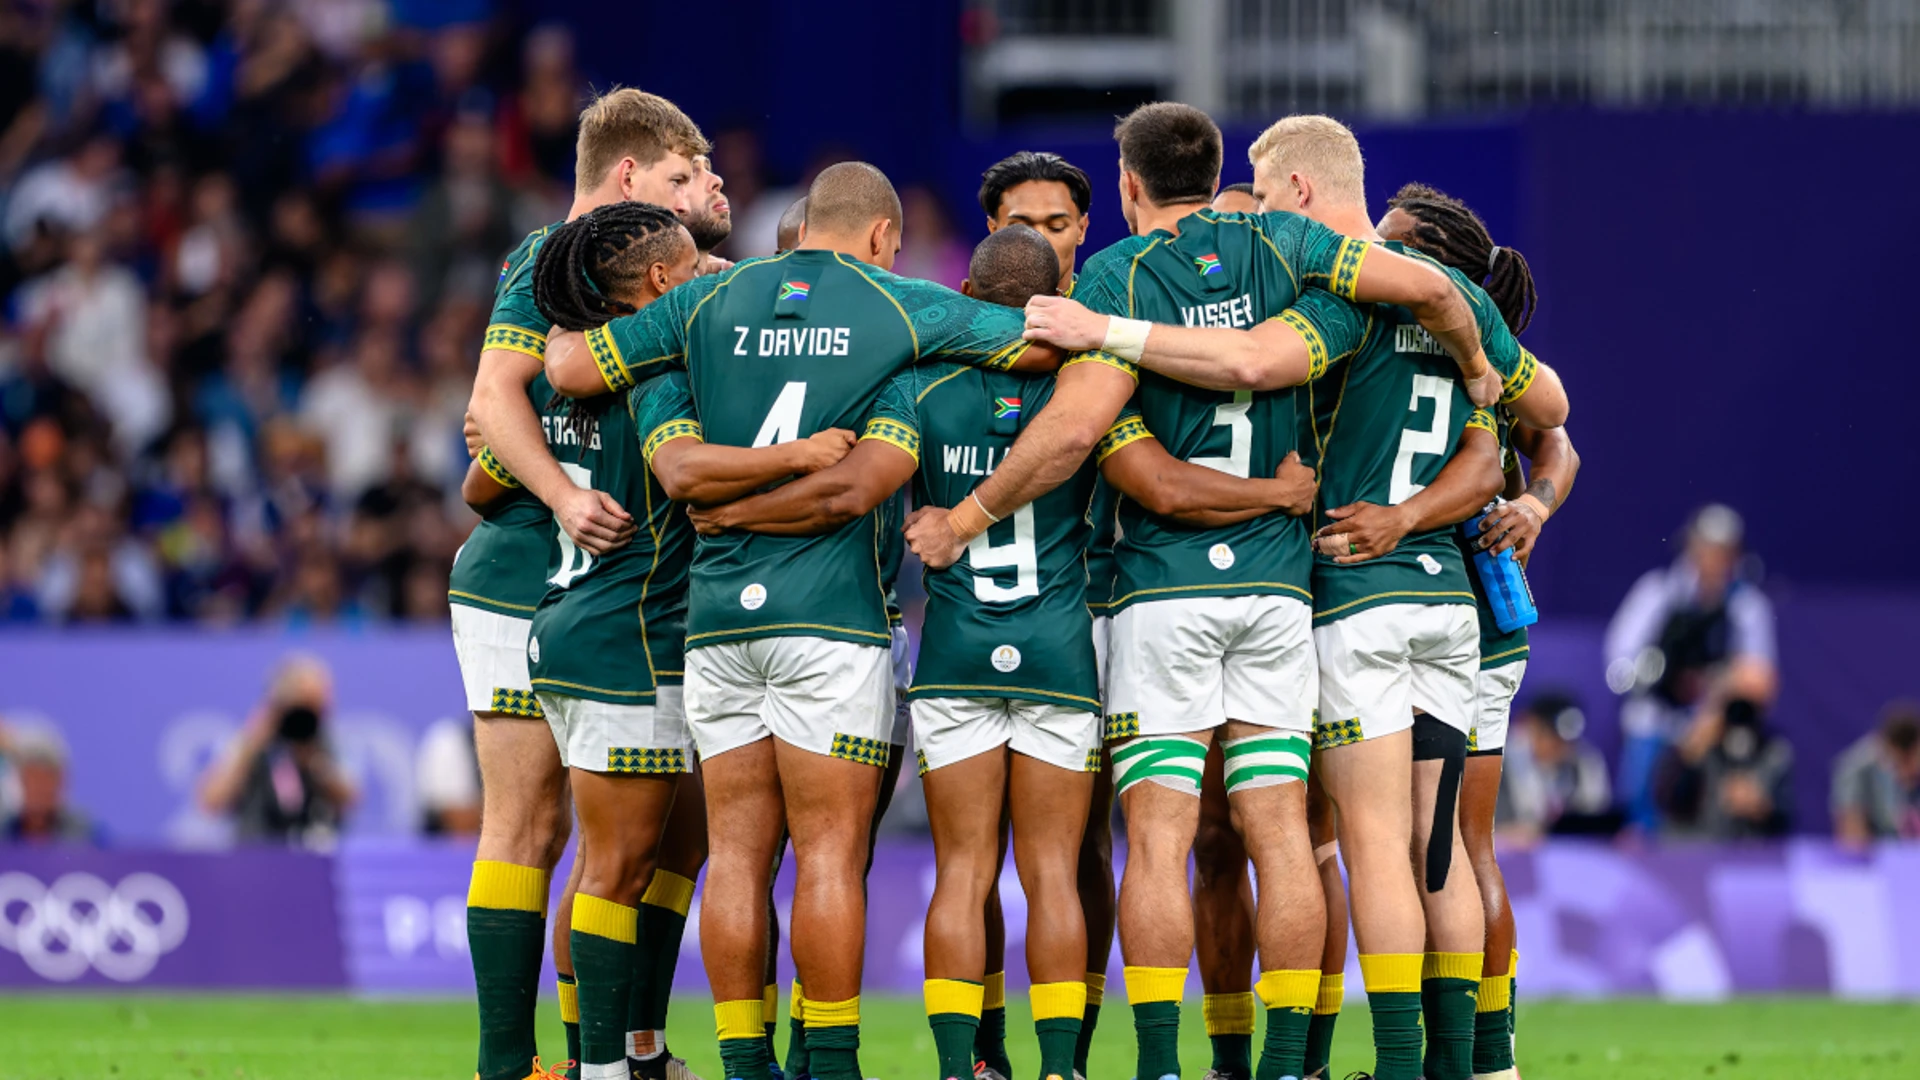 Partisanship and revenge: The Stade de France combination the Blitzboks need to overcome